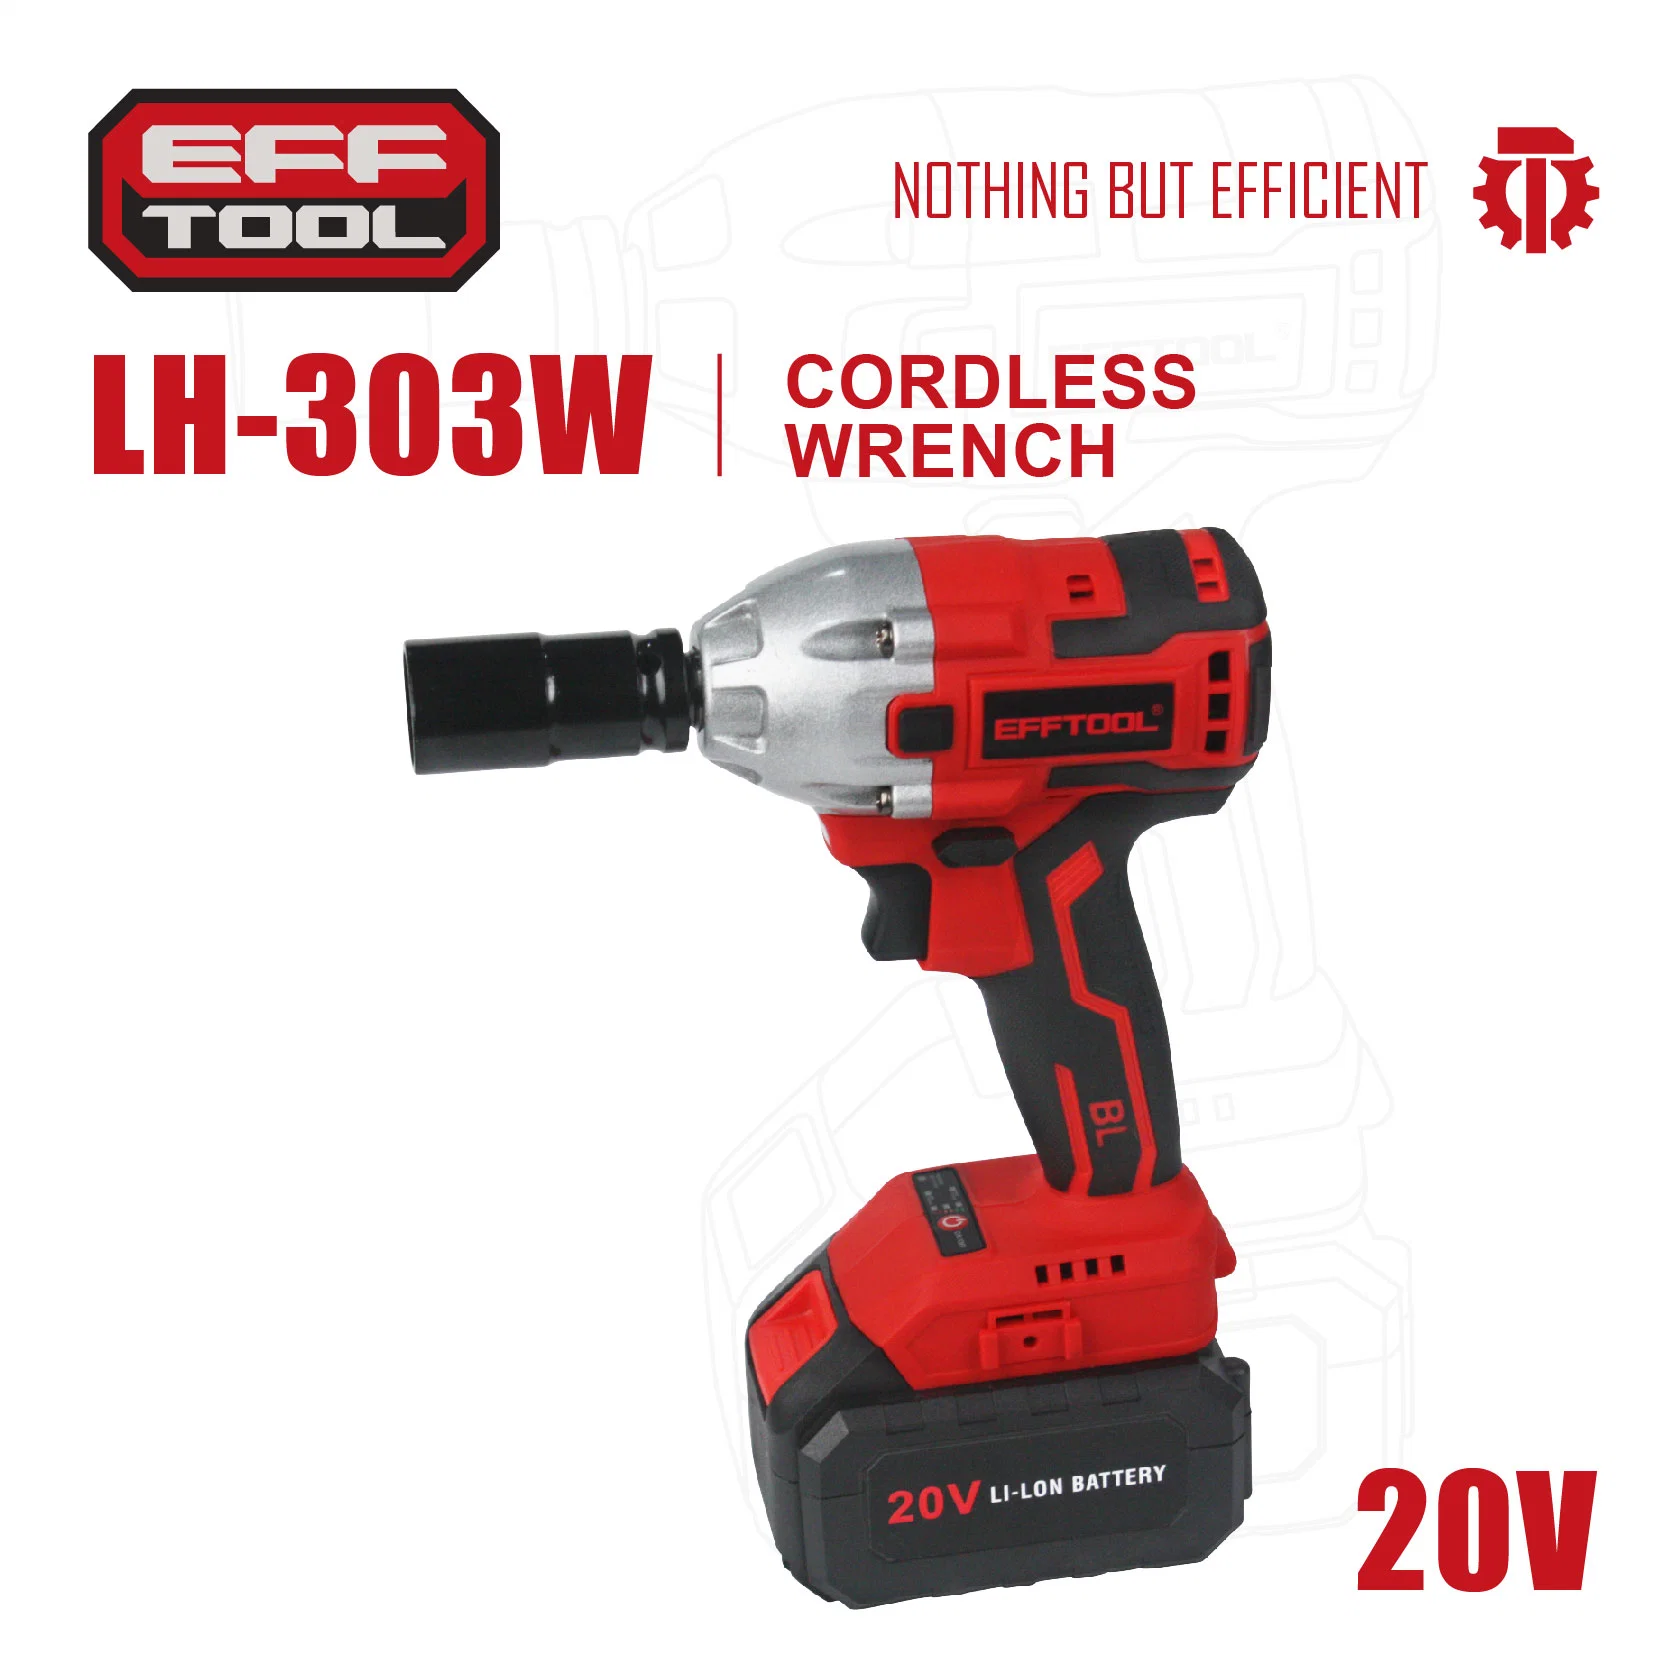 Efftool Cordless Wrench Power Tools 20V with Battery